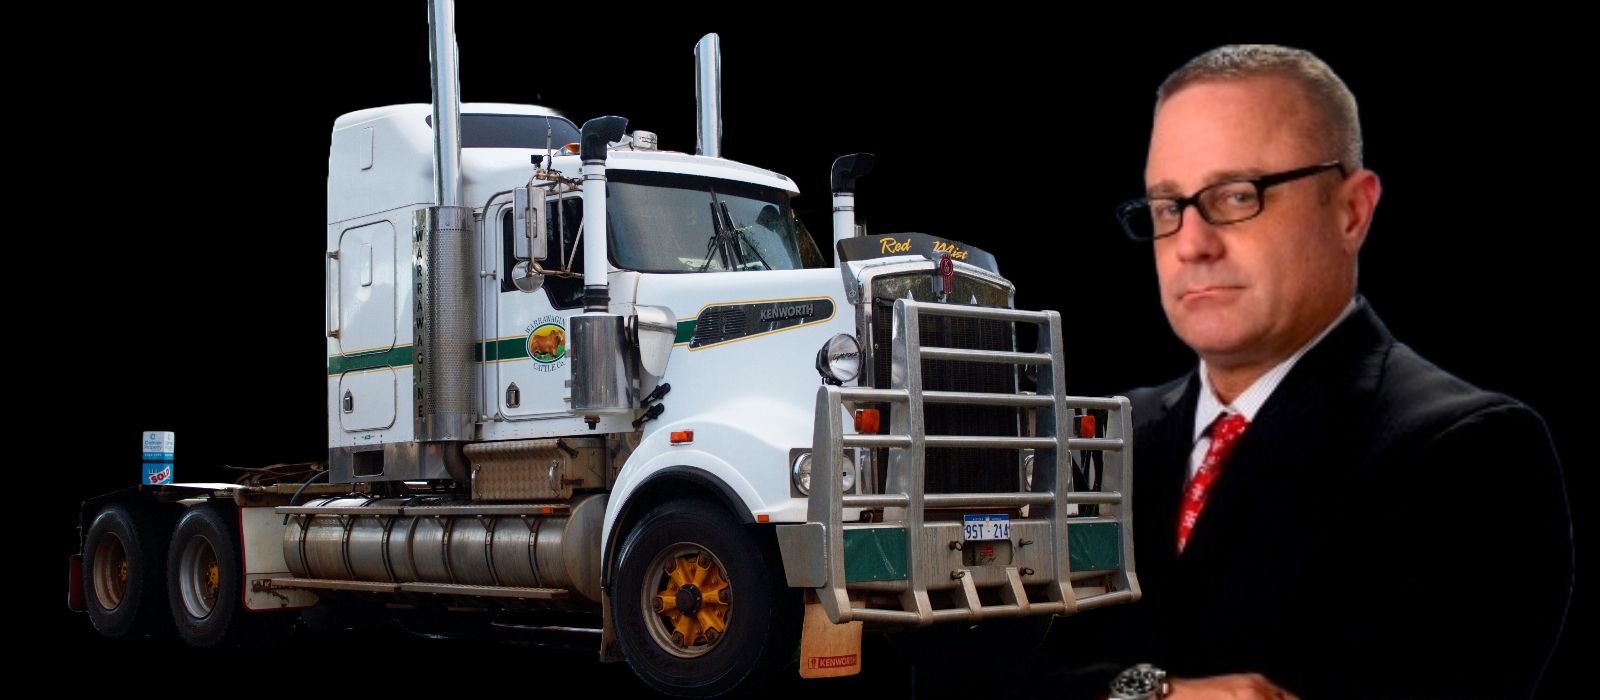 Bobtail Trucks and Their Dangers to Others